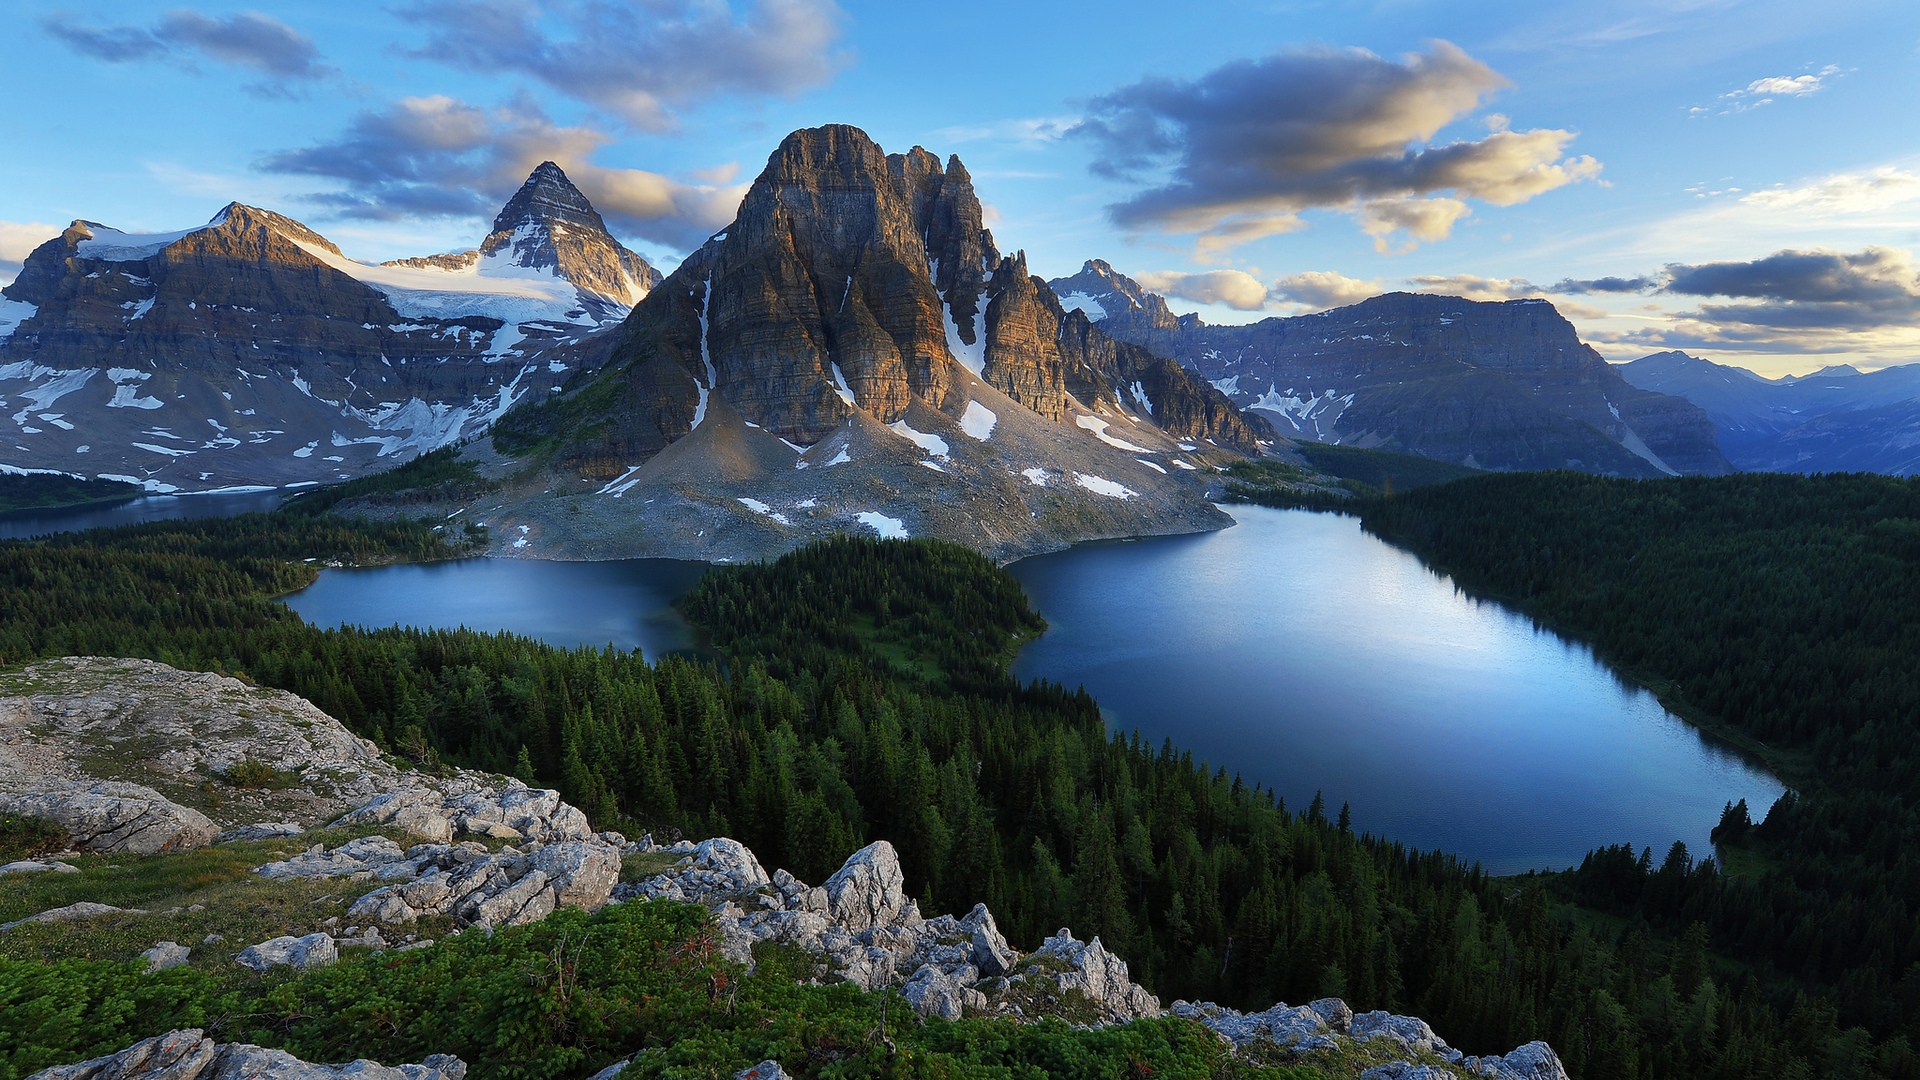 Mountains and Lakes for 1920 x 1080 HDTV 1080p resolution